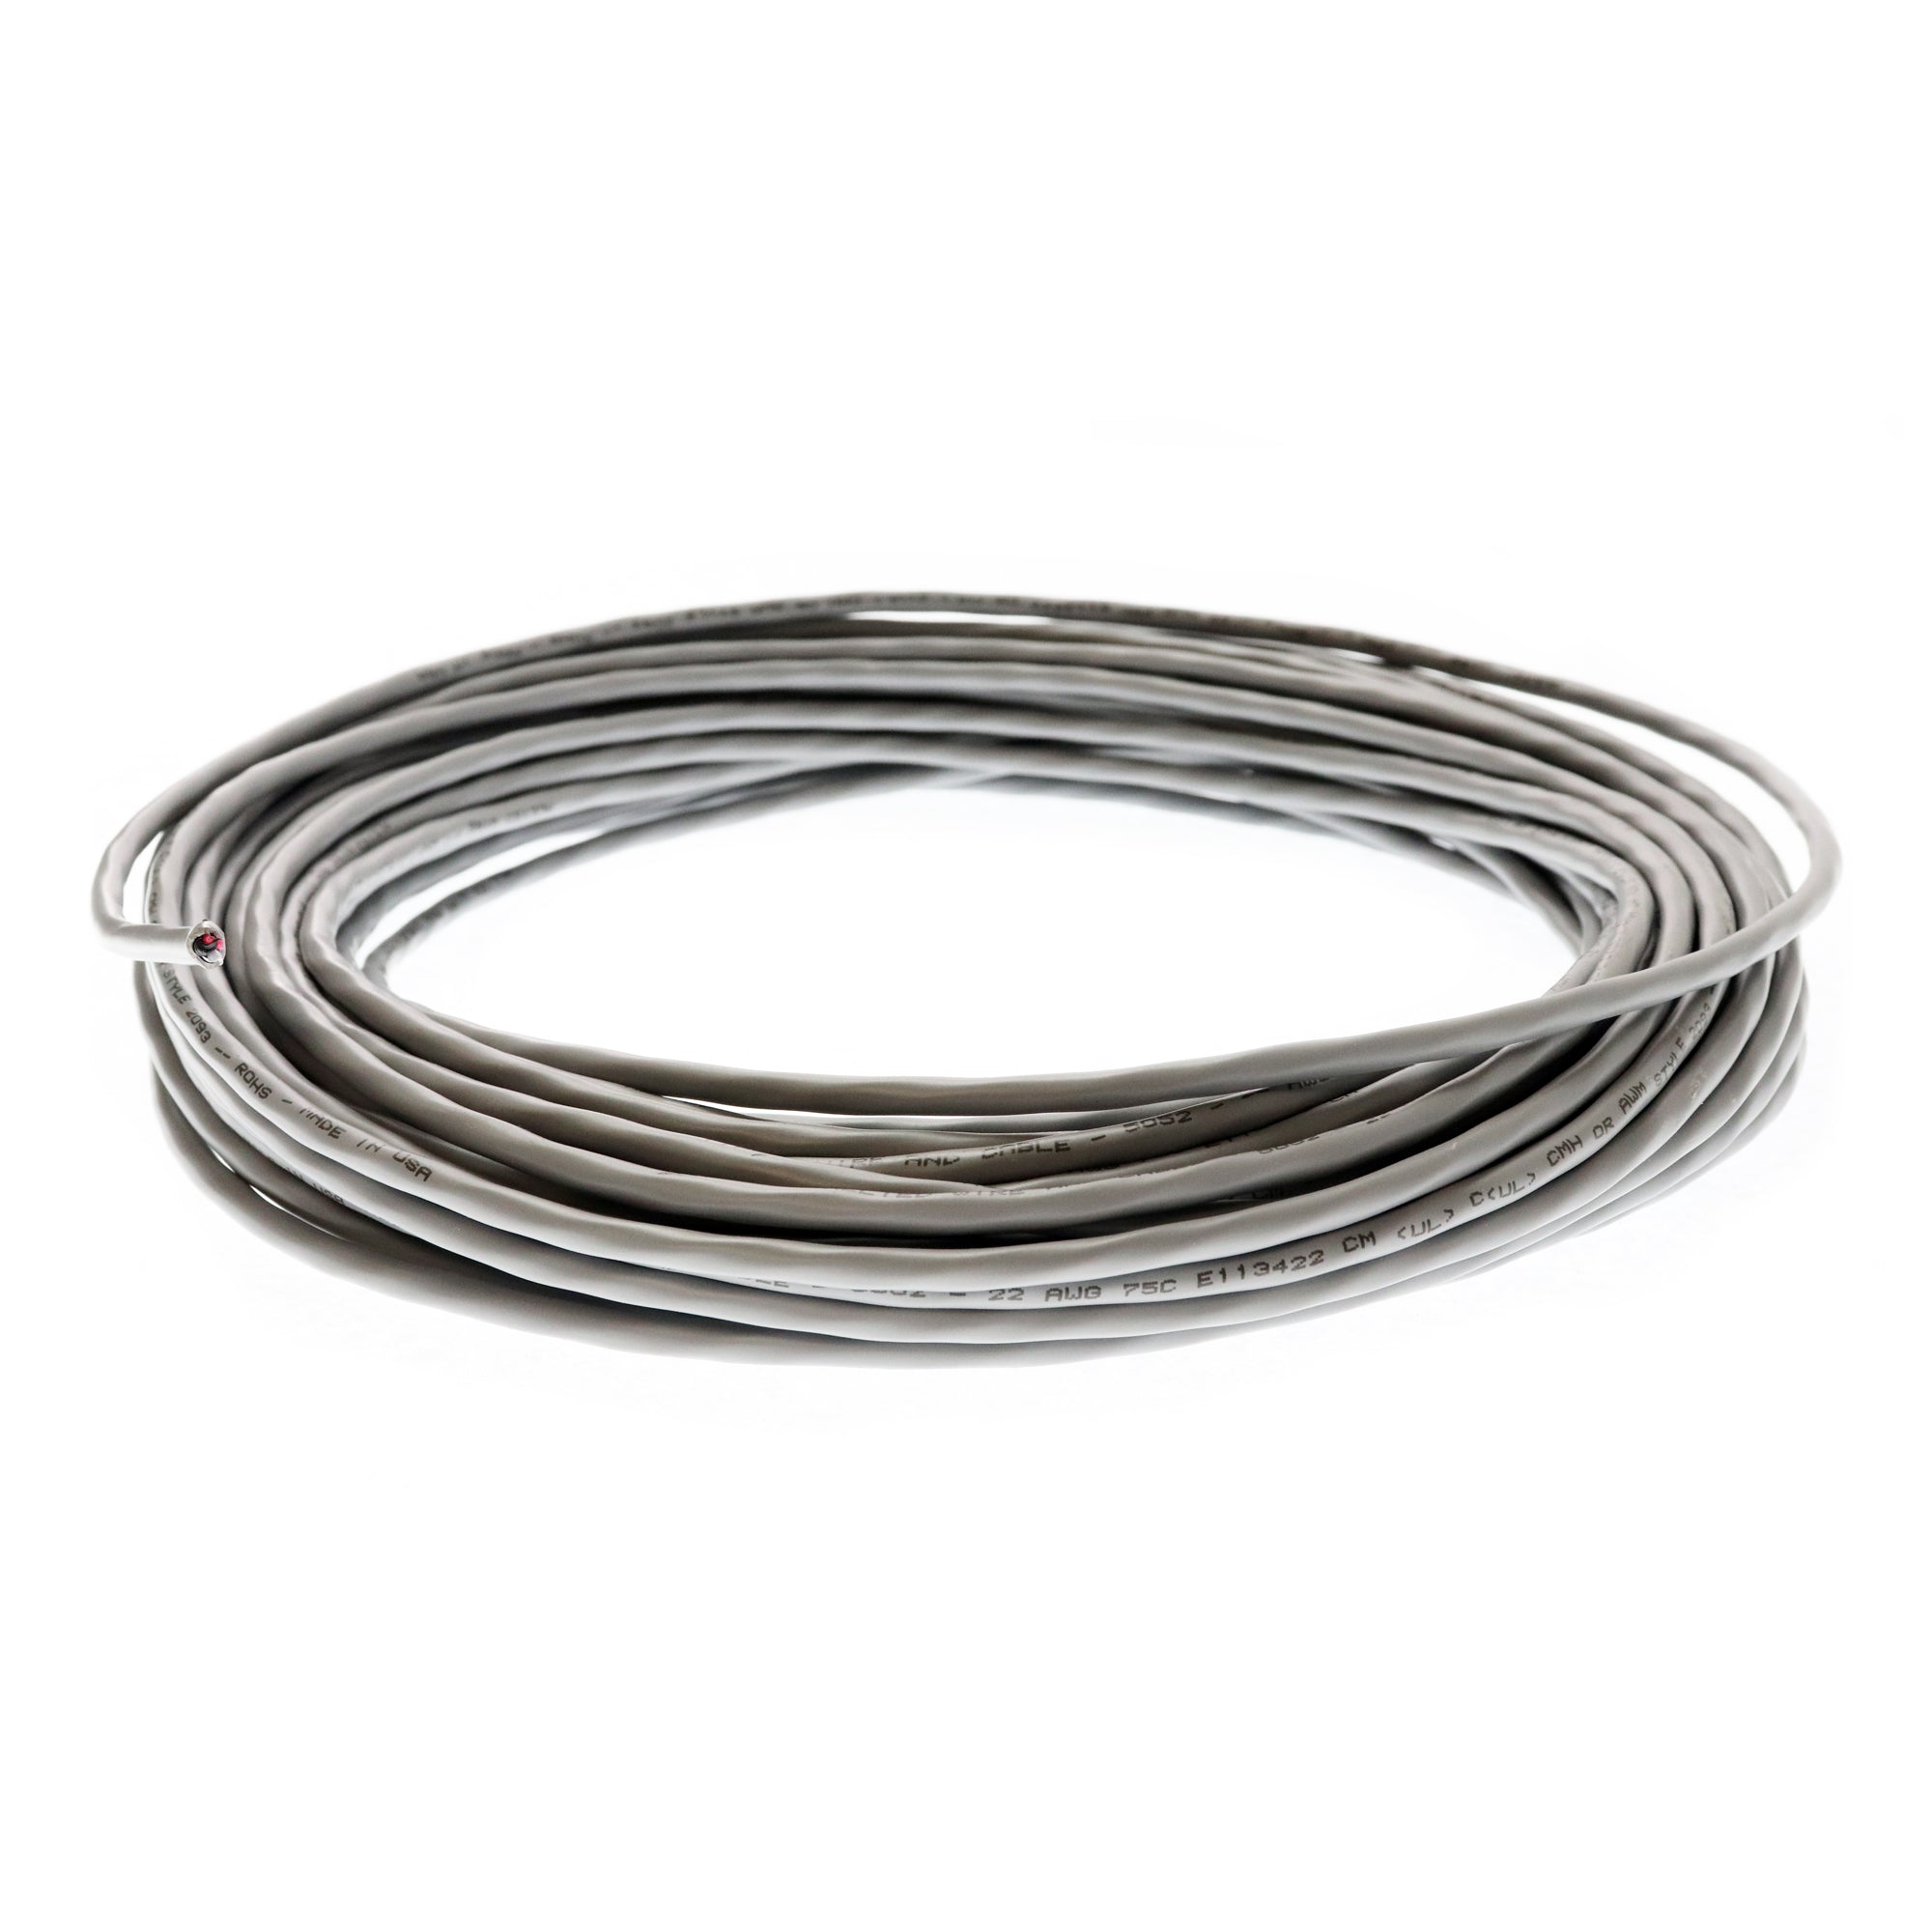 Allied Wire & Cable, ALLIED 5052 SHIELDED MULTI-CONDUCTOR CABLE, 22/4C, GRAY PVC JACKET, 50-FEET